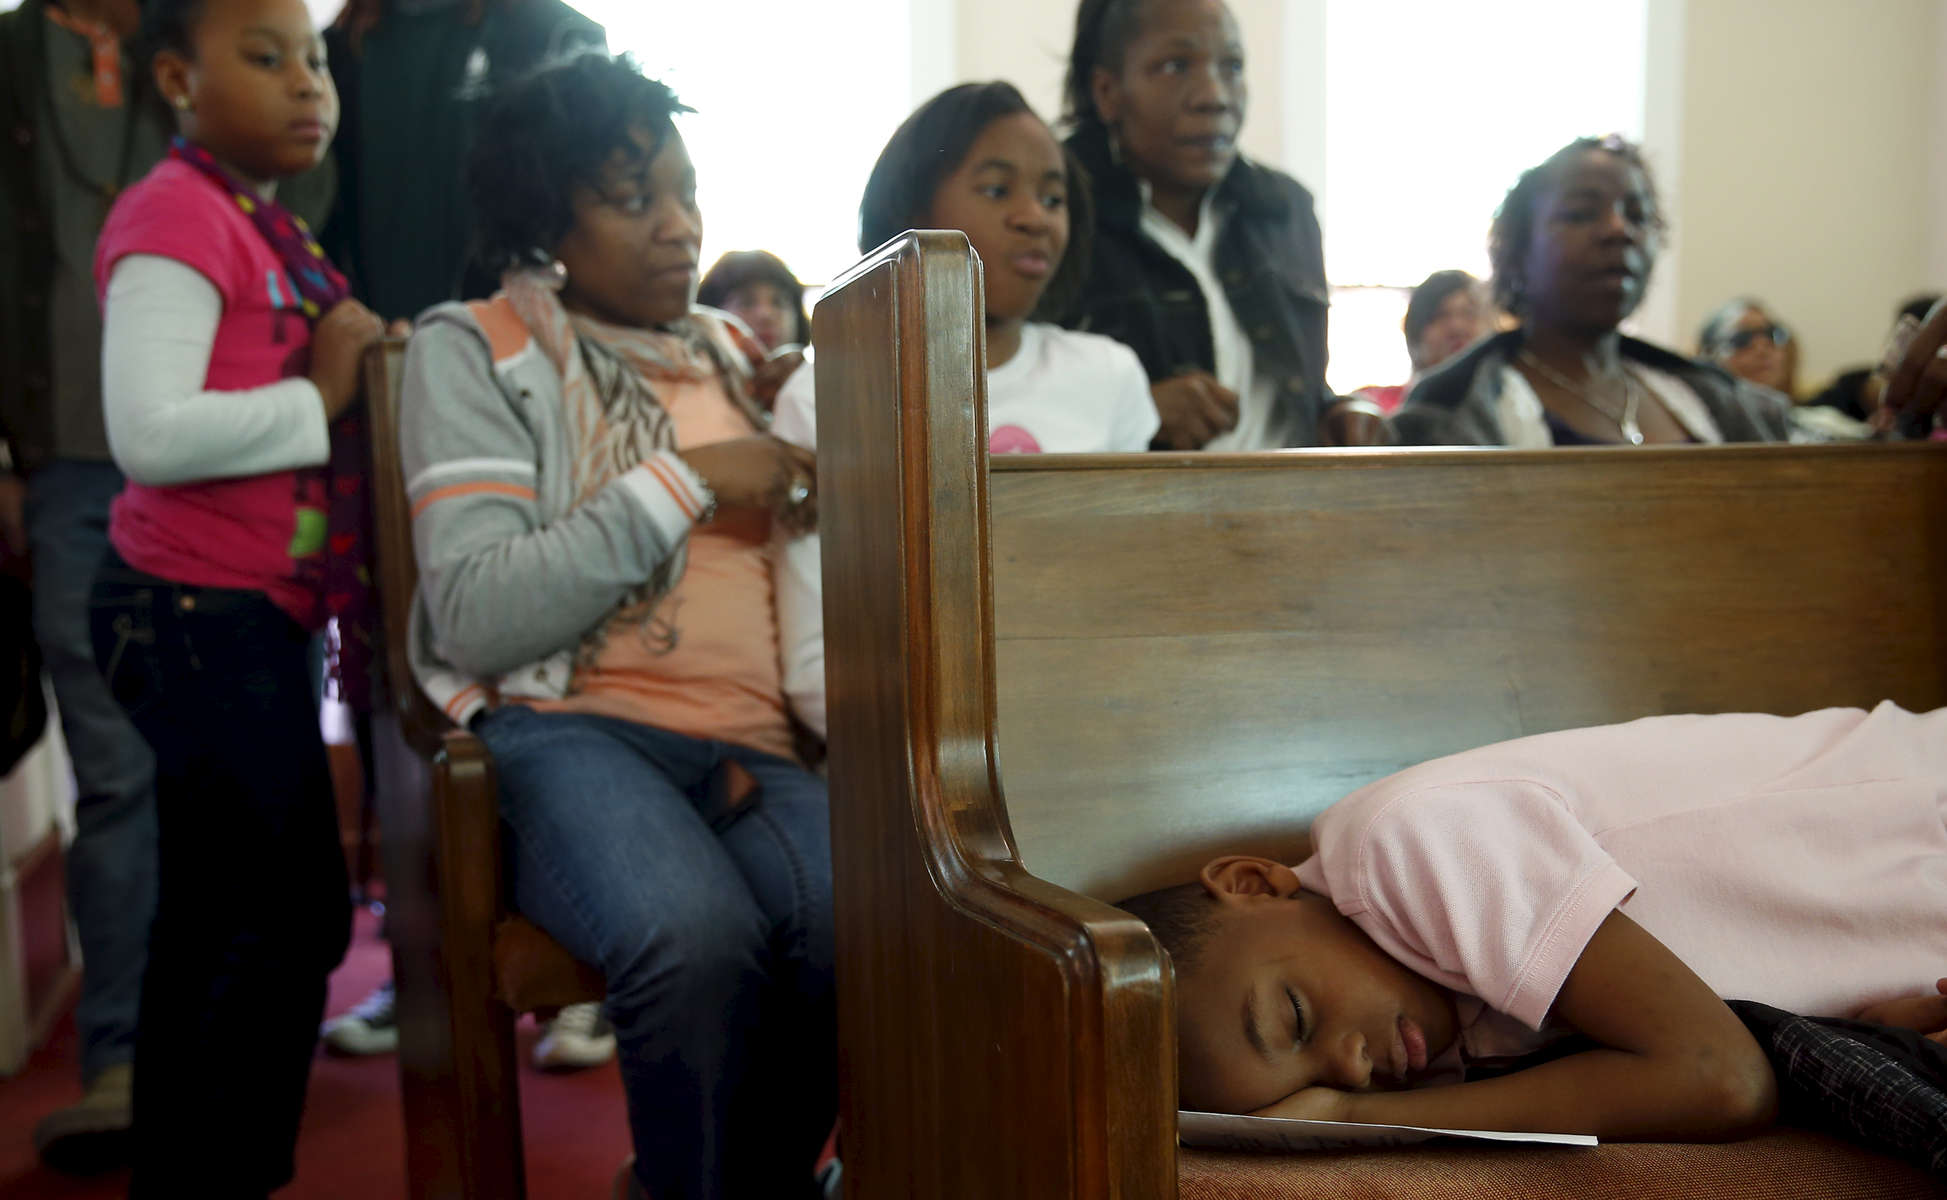 Selma, Alabama -- 3/08/2015-- A boy rests on a pew during services at Tabernacle Baptist Church where former Massachusetts Governor Deval Patrick addressed the faithful in Selma, Alabama March 8, 2015. 